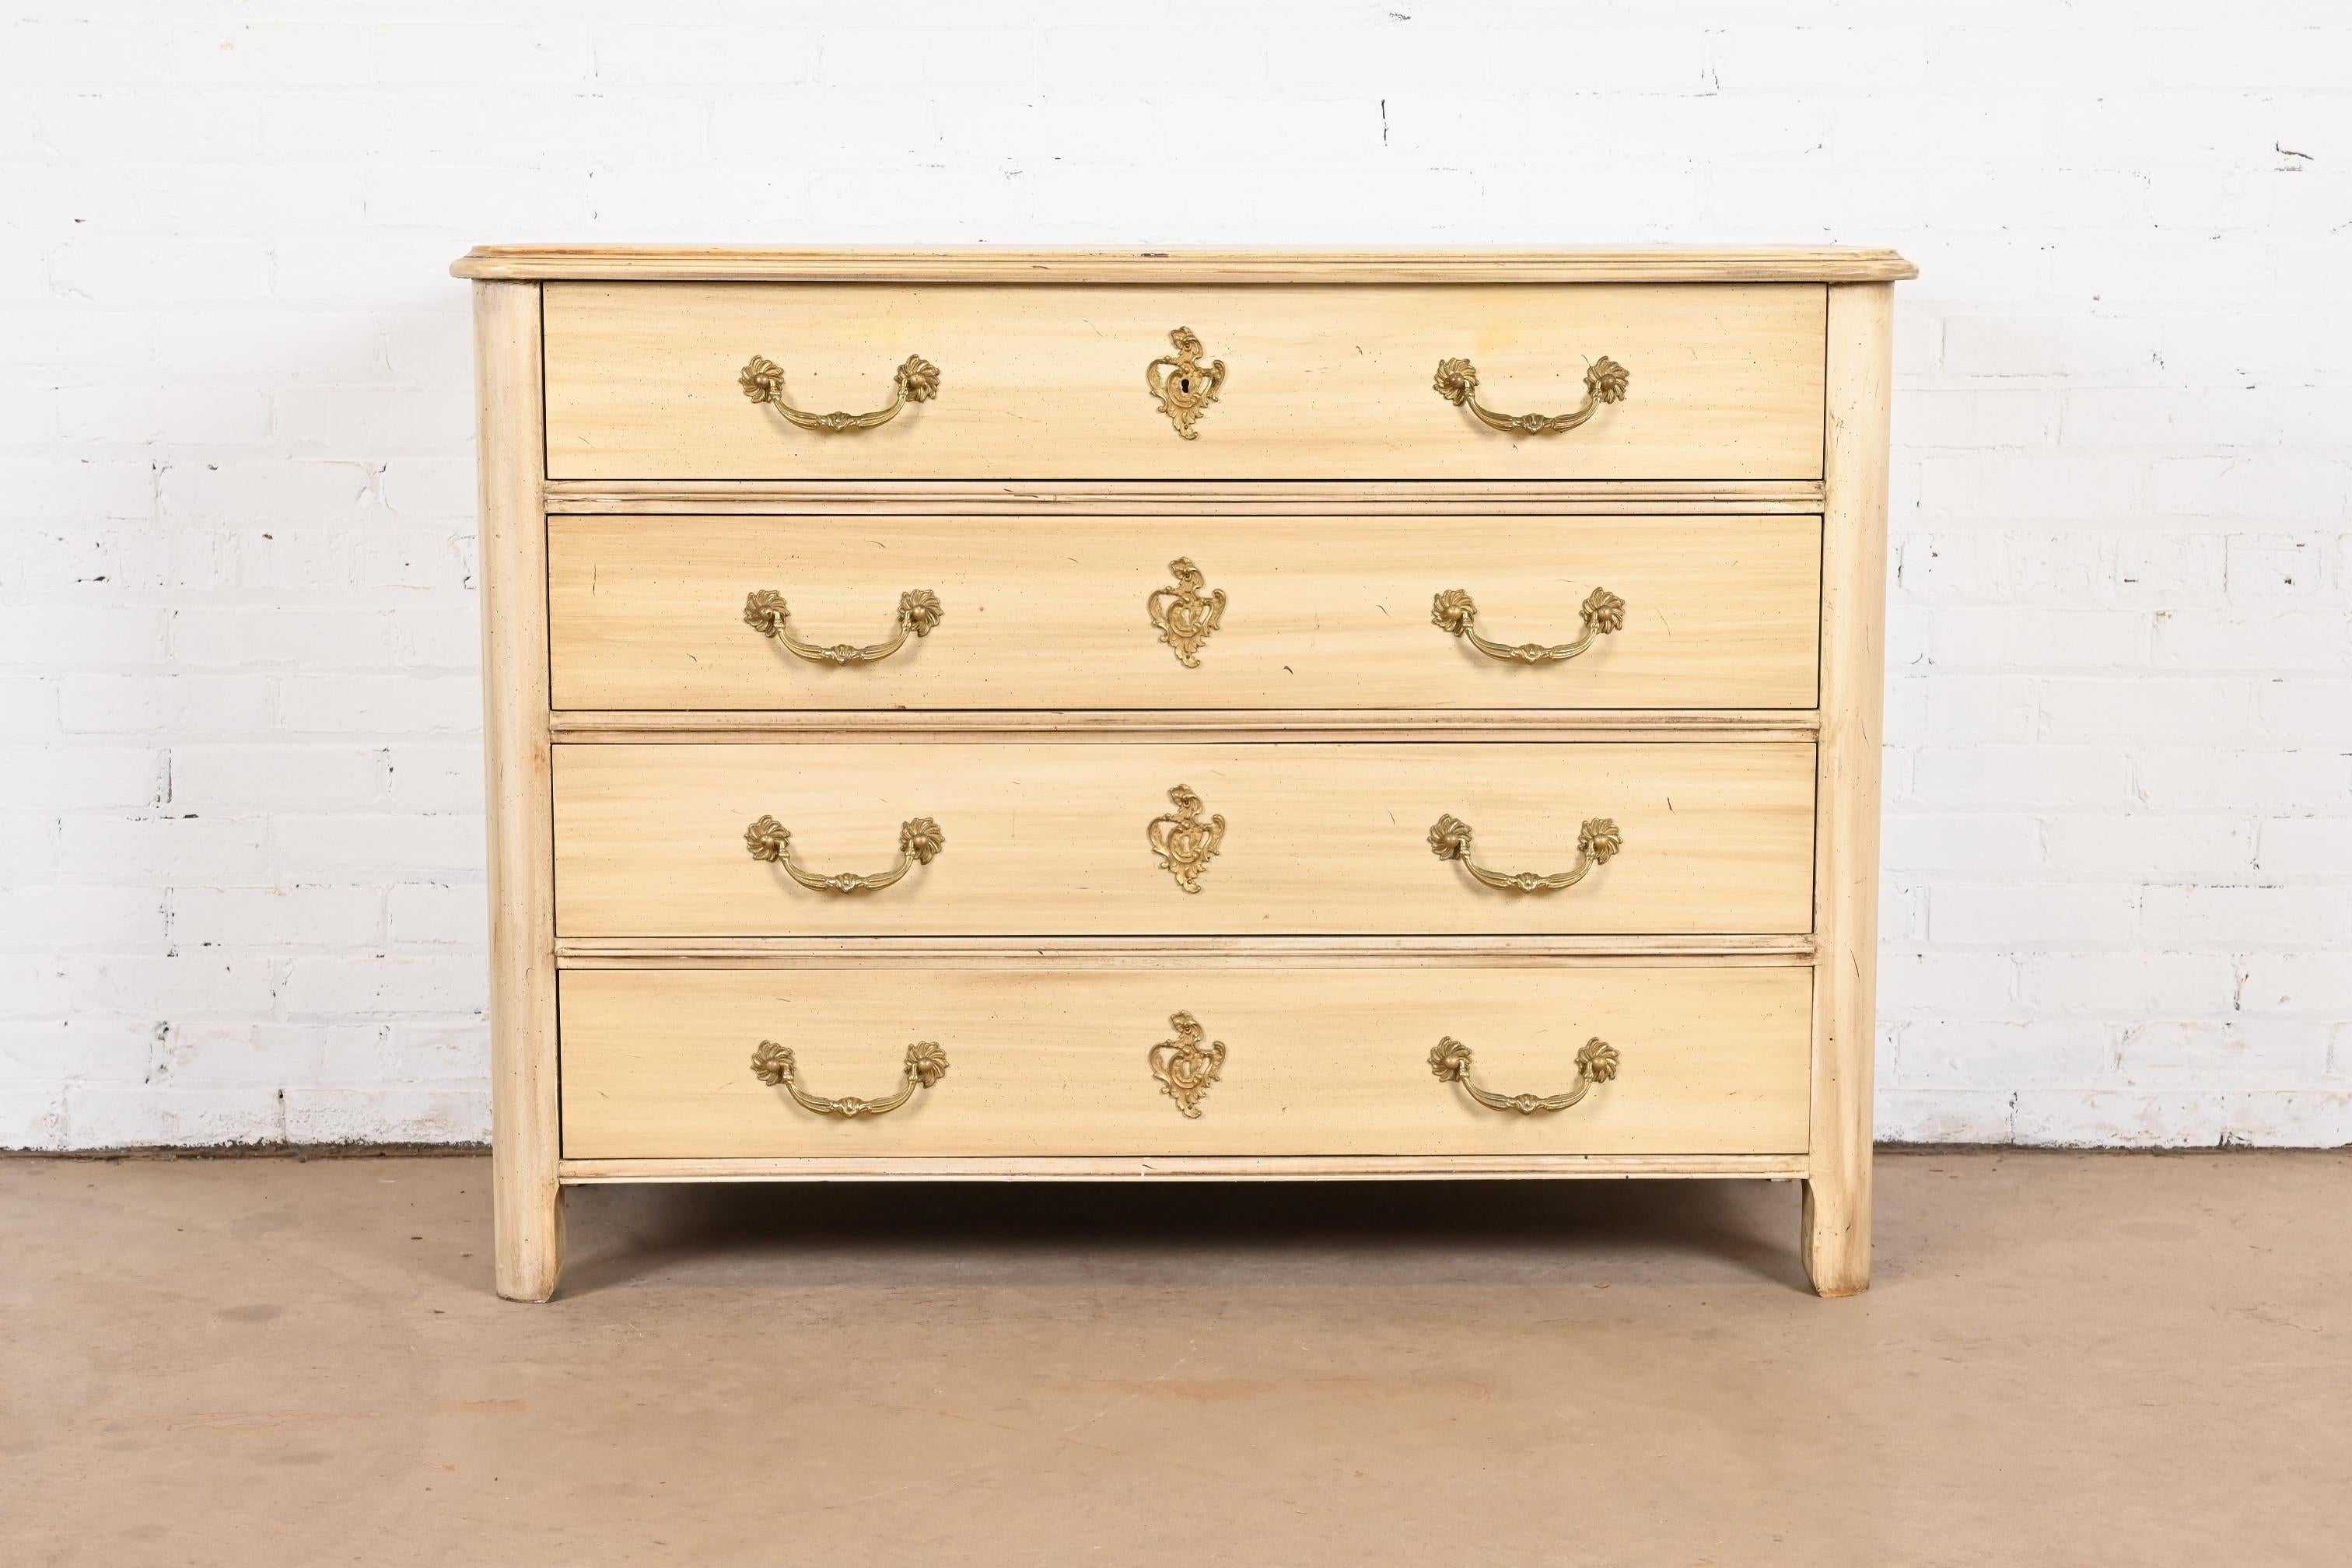 1960s french provincial furniture